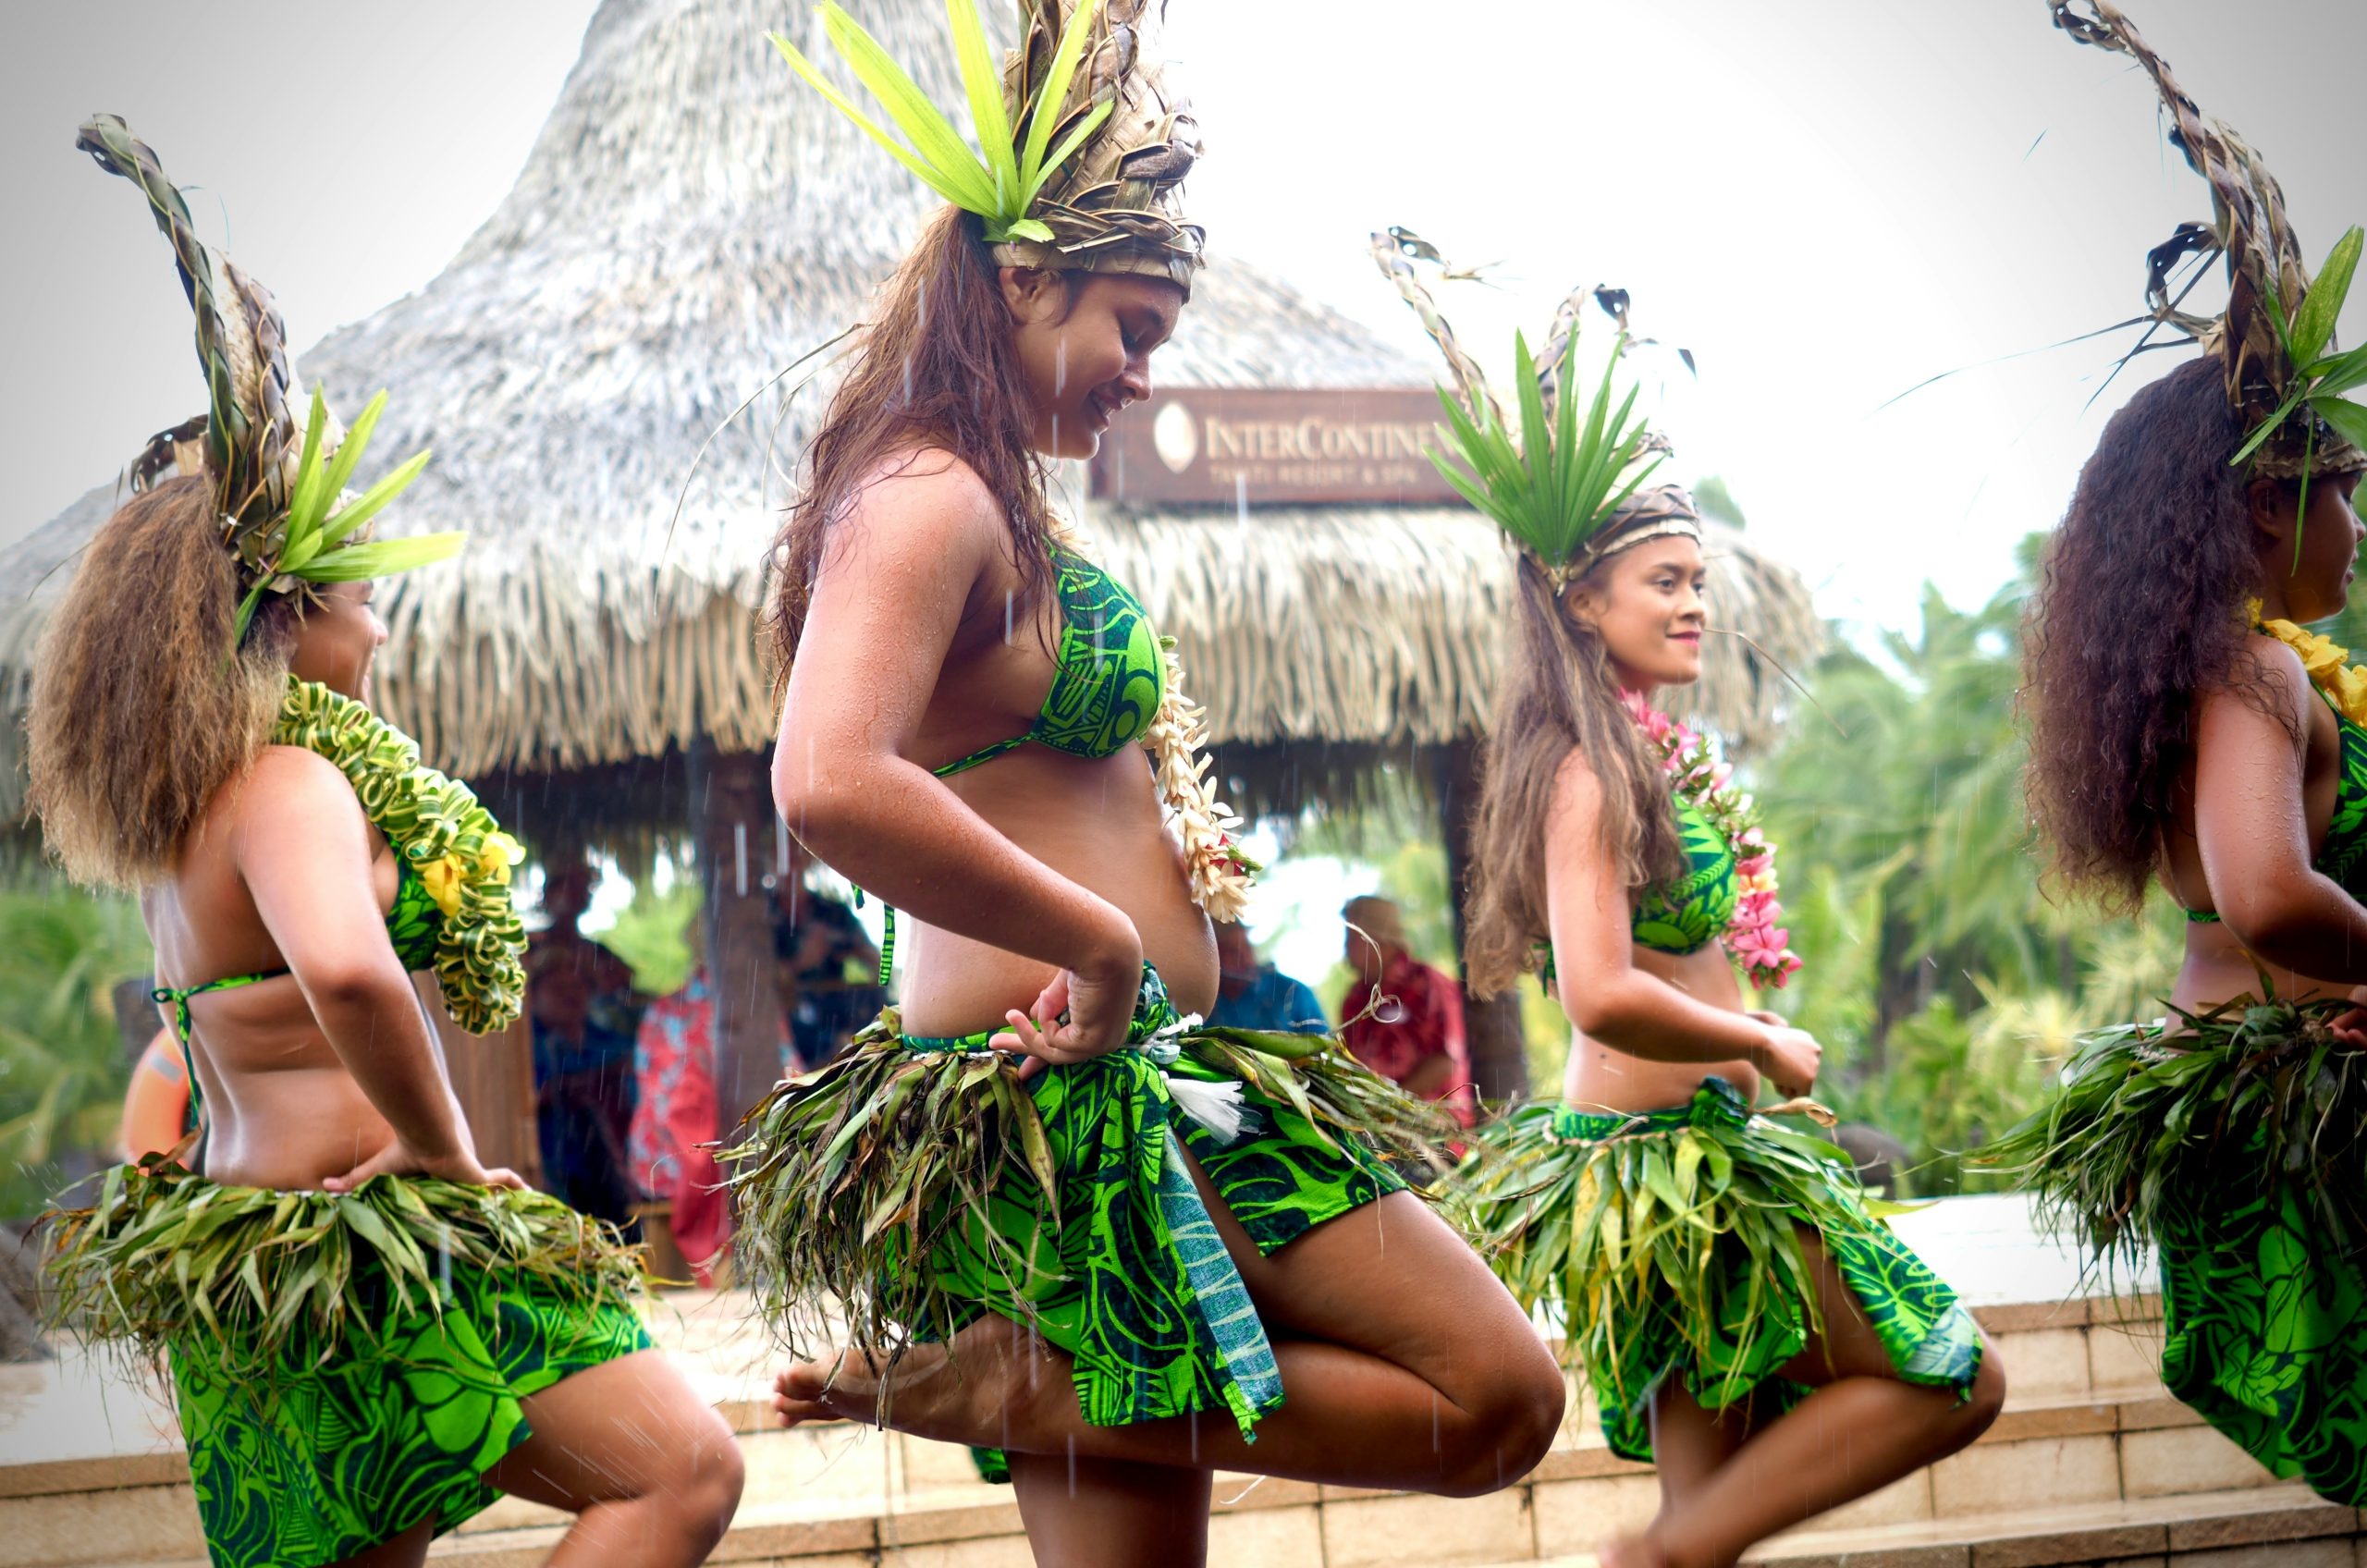 discover the beauty of tahiti with tahiti tourism. plan your dream vacation with our travel guides, activities, and accommodation recommendations.